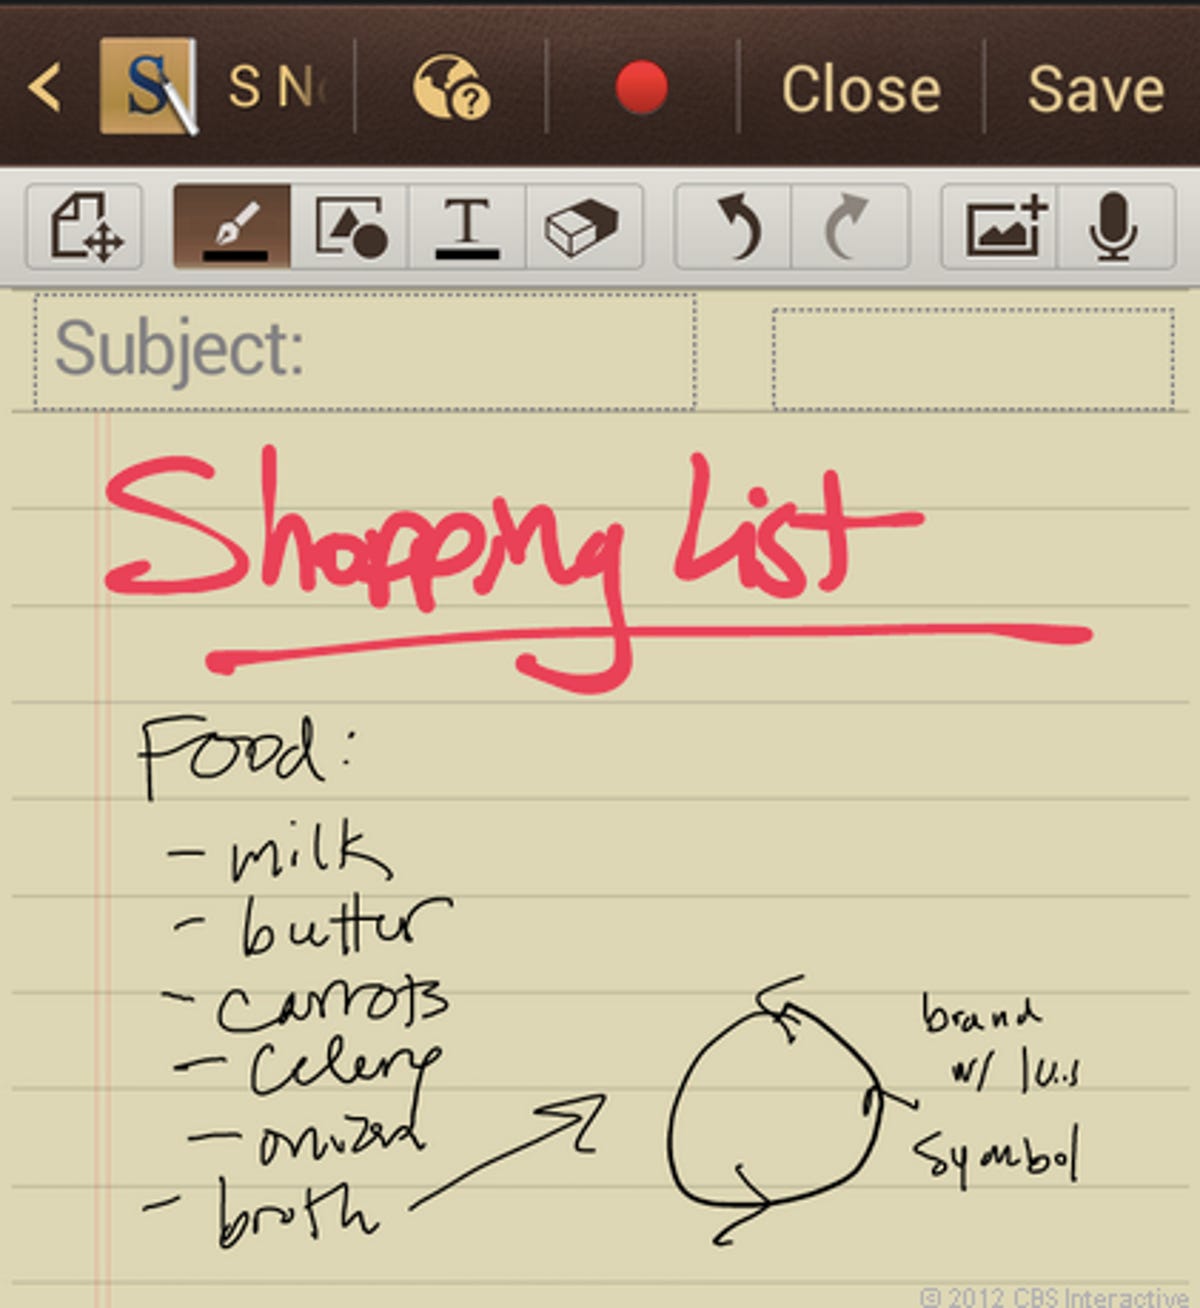 S Note in Samsung Galaxy Note 2